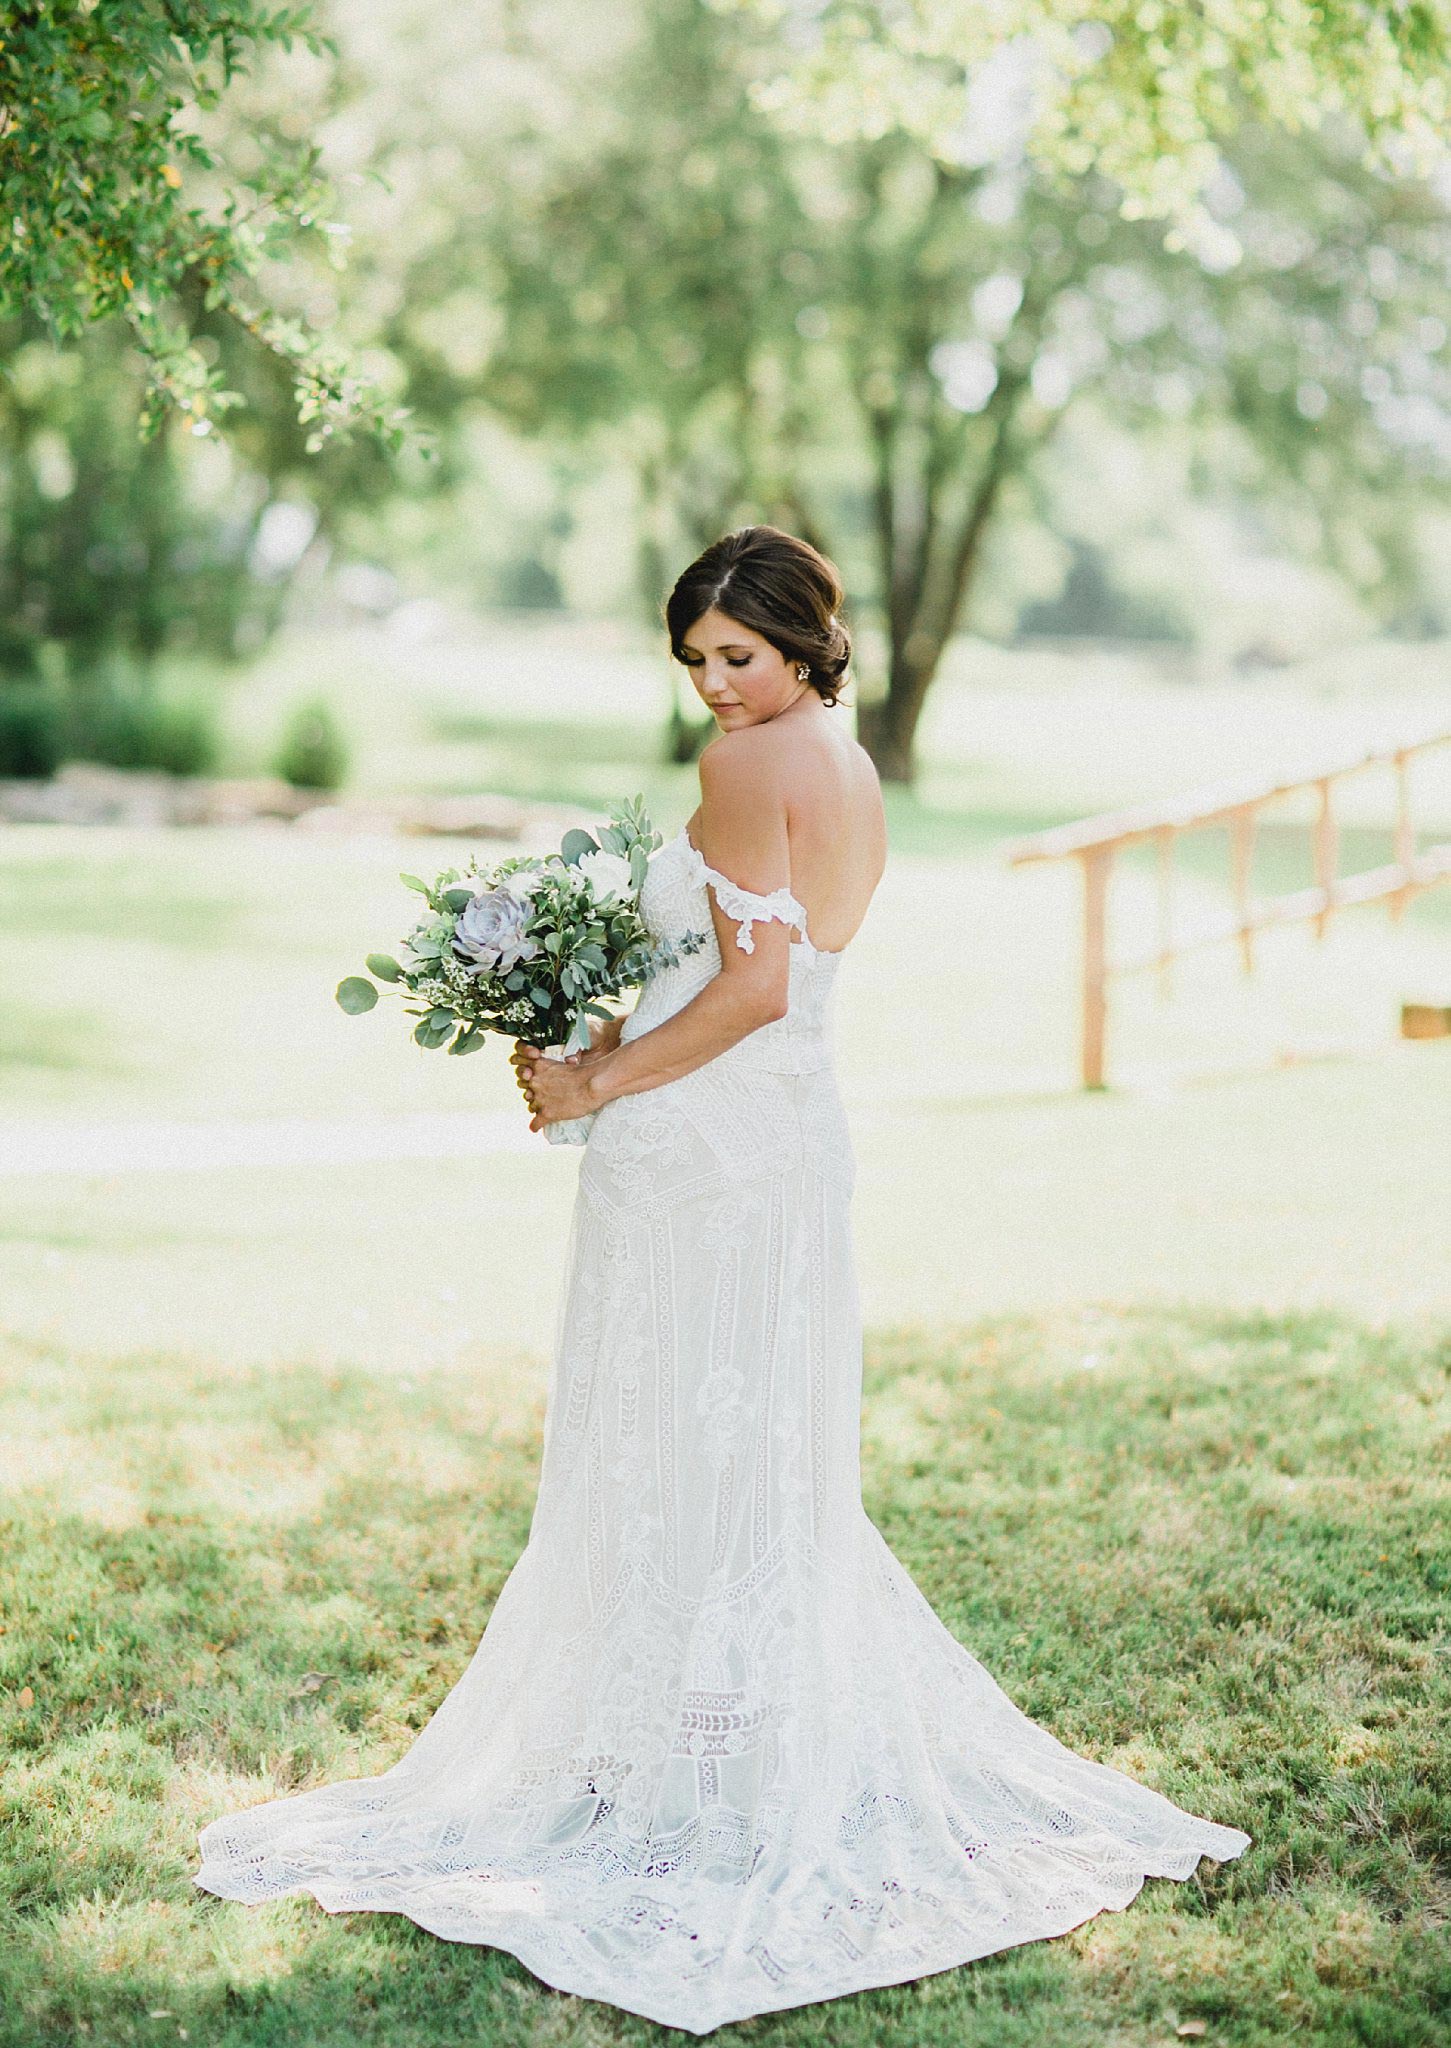 Bride in boho lace dress holding a light greenery bouquet